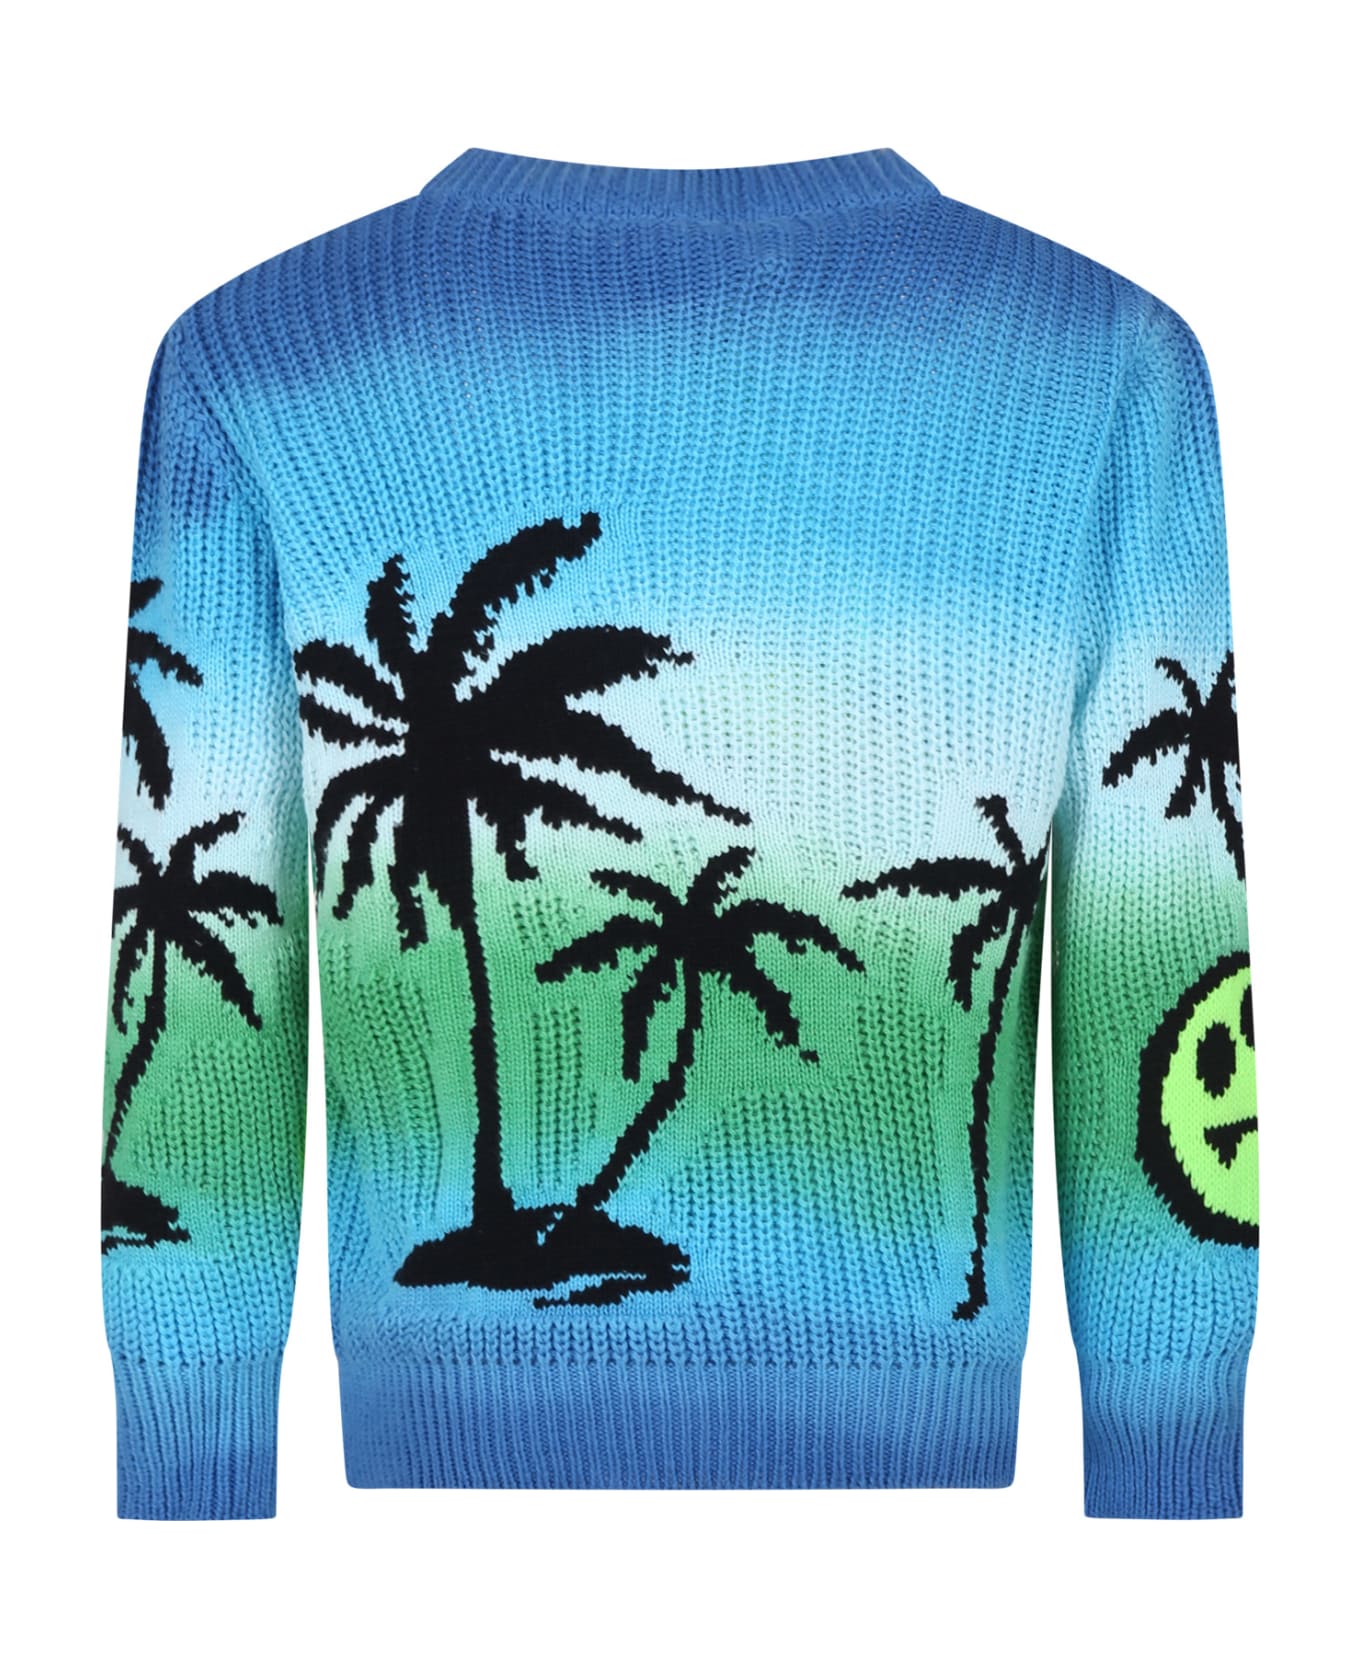 Barrow Light Blue Cotton Sweater For Kids With Smiley And Palm Trees - Turchese/Turquoise